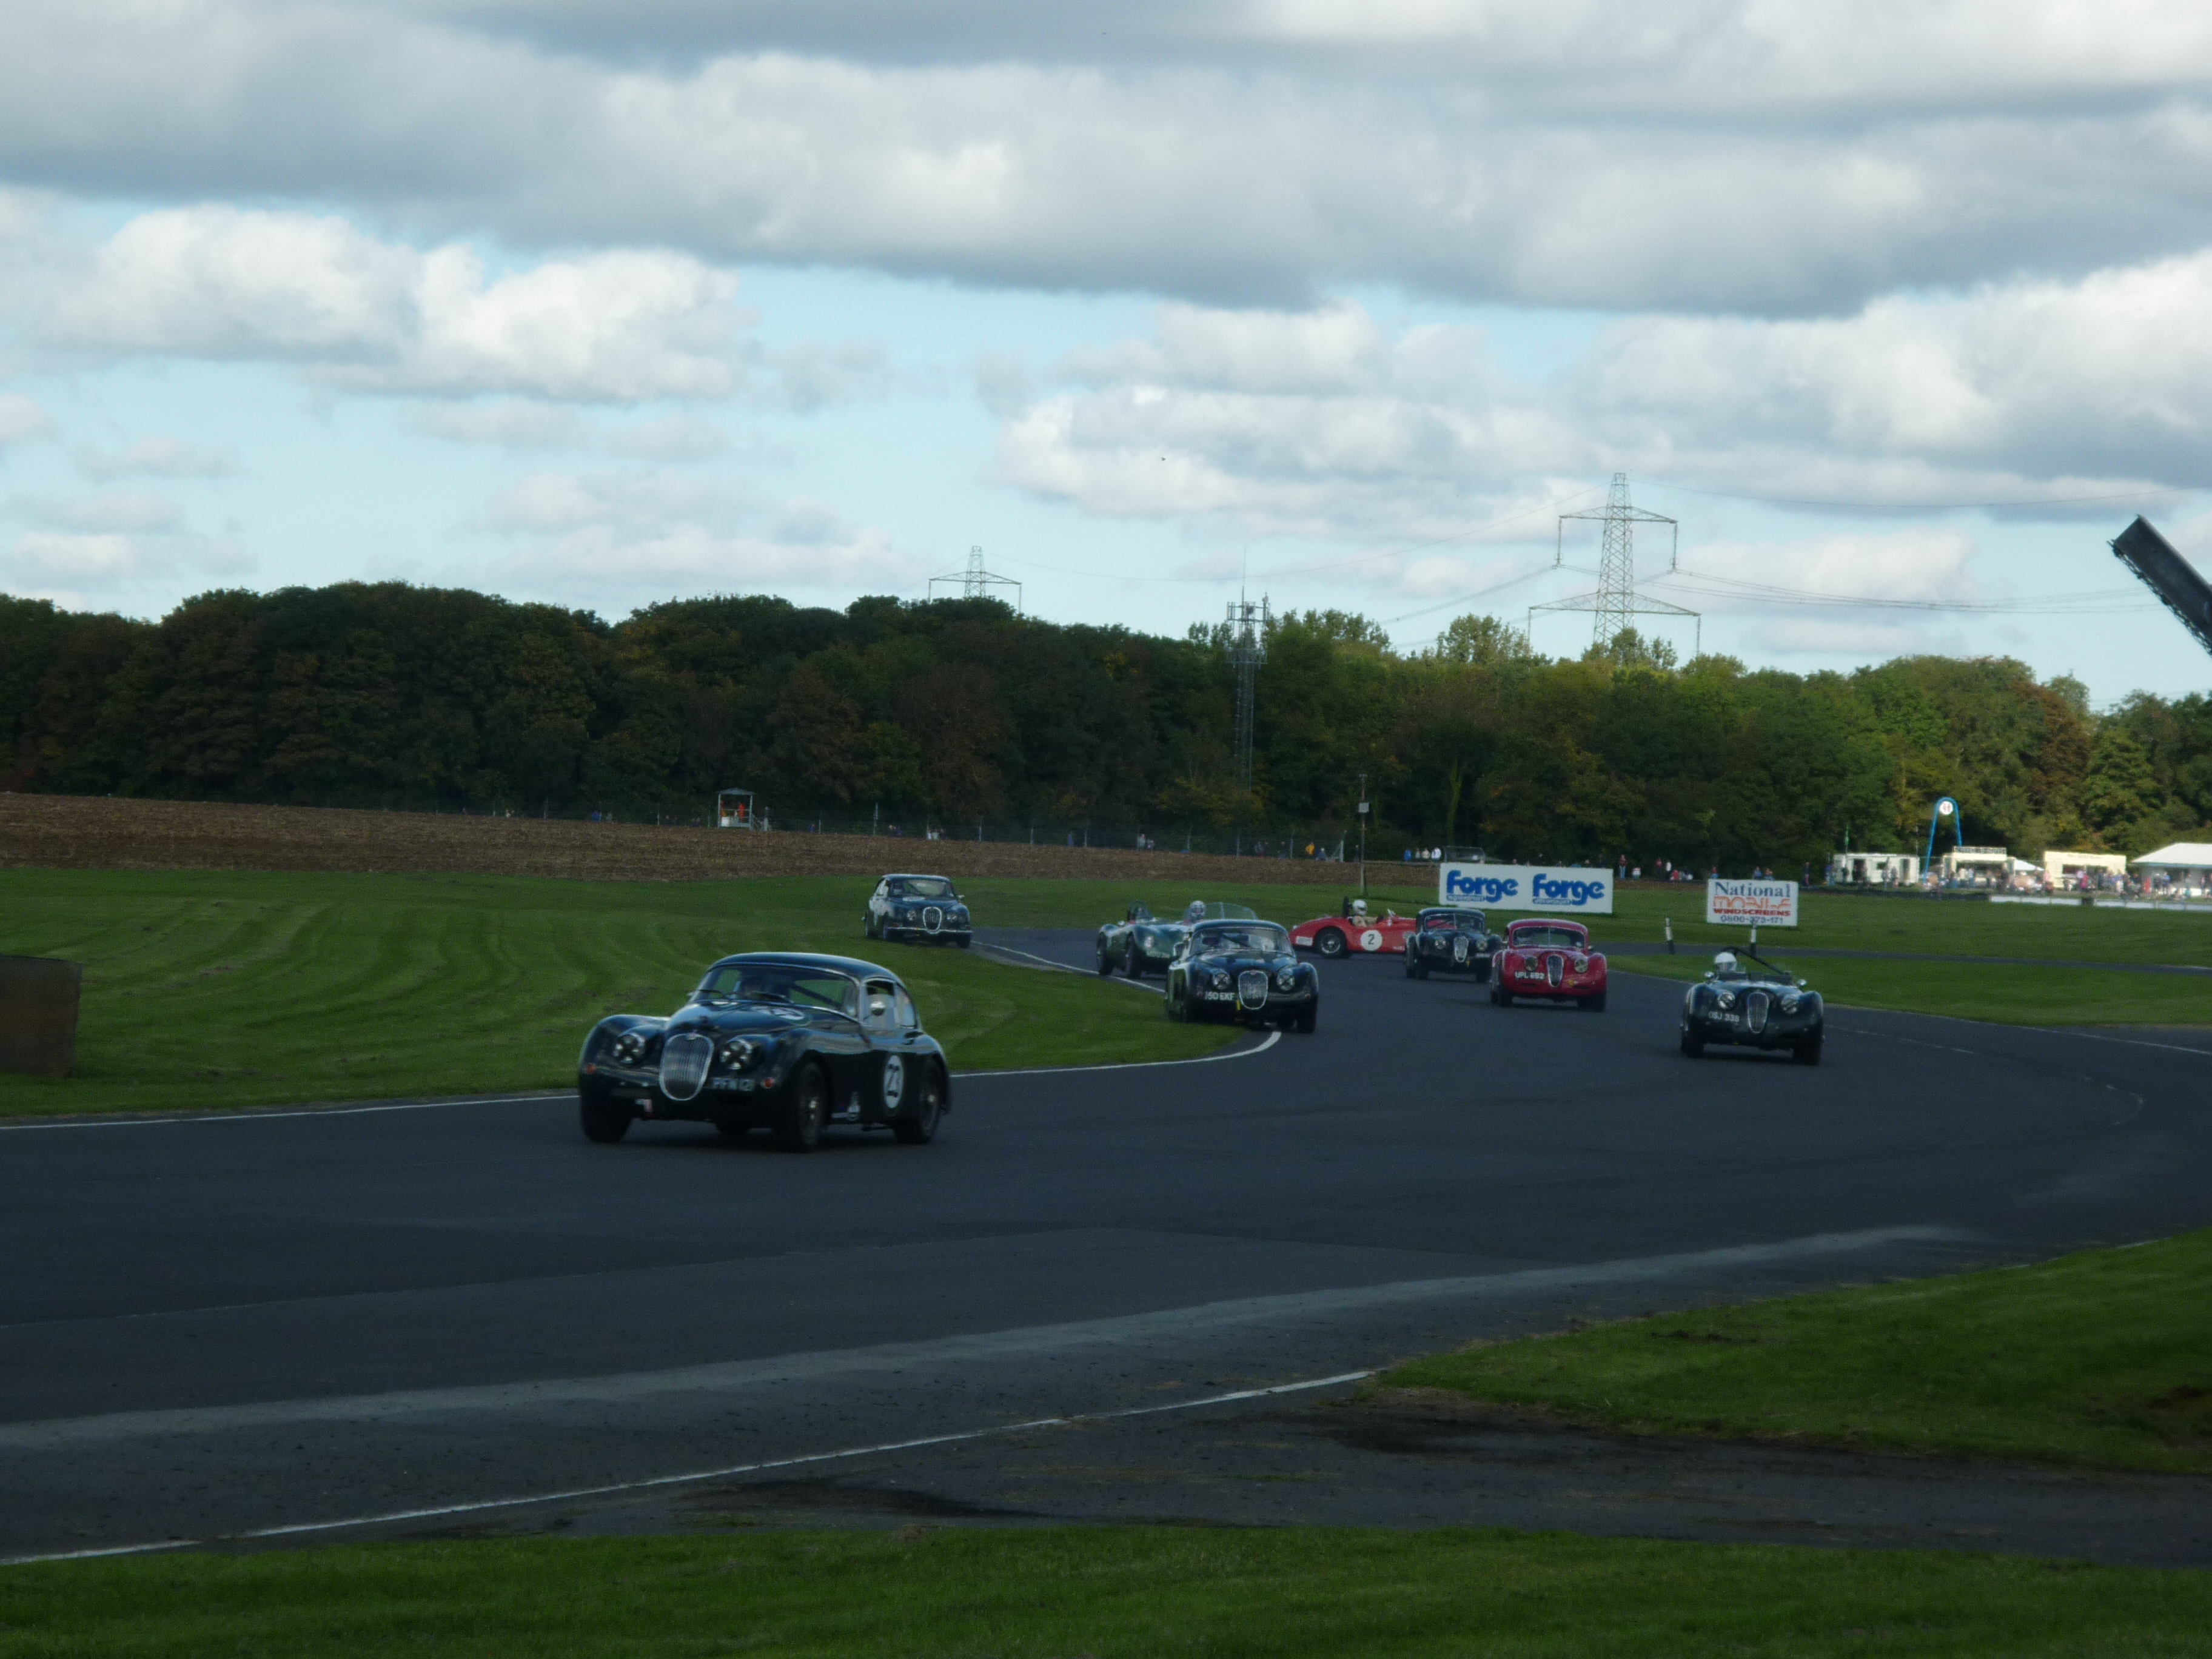 Car spins centre pack on the opening lap of the pre-66 Jaguar race